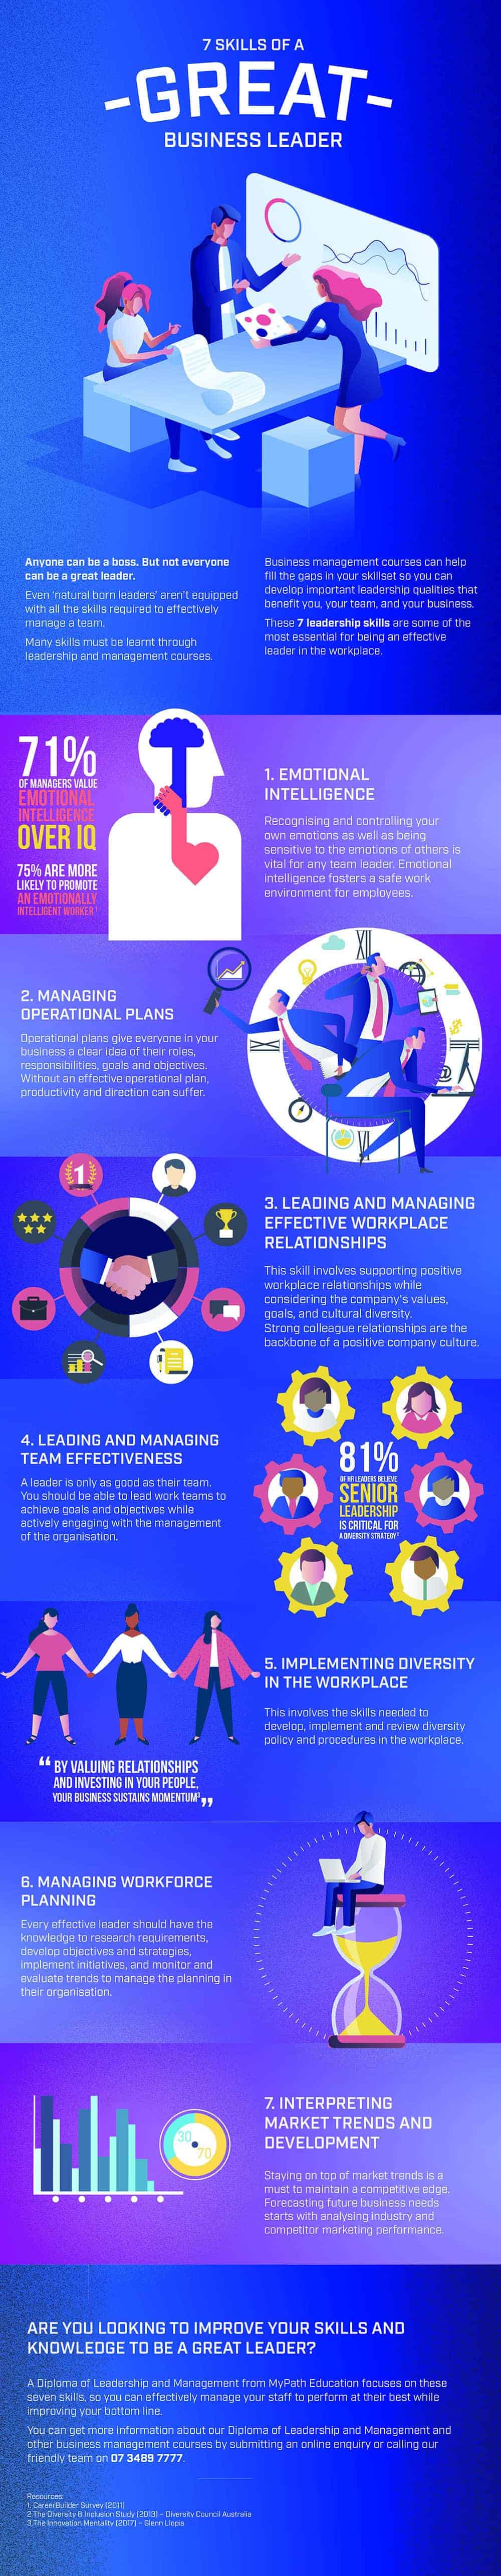 Infographic: 7 skills of a great leader - what you learn in our business management courses